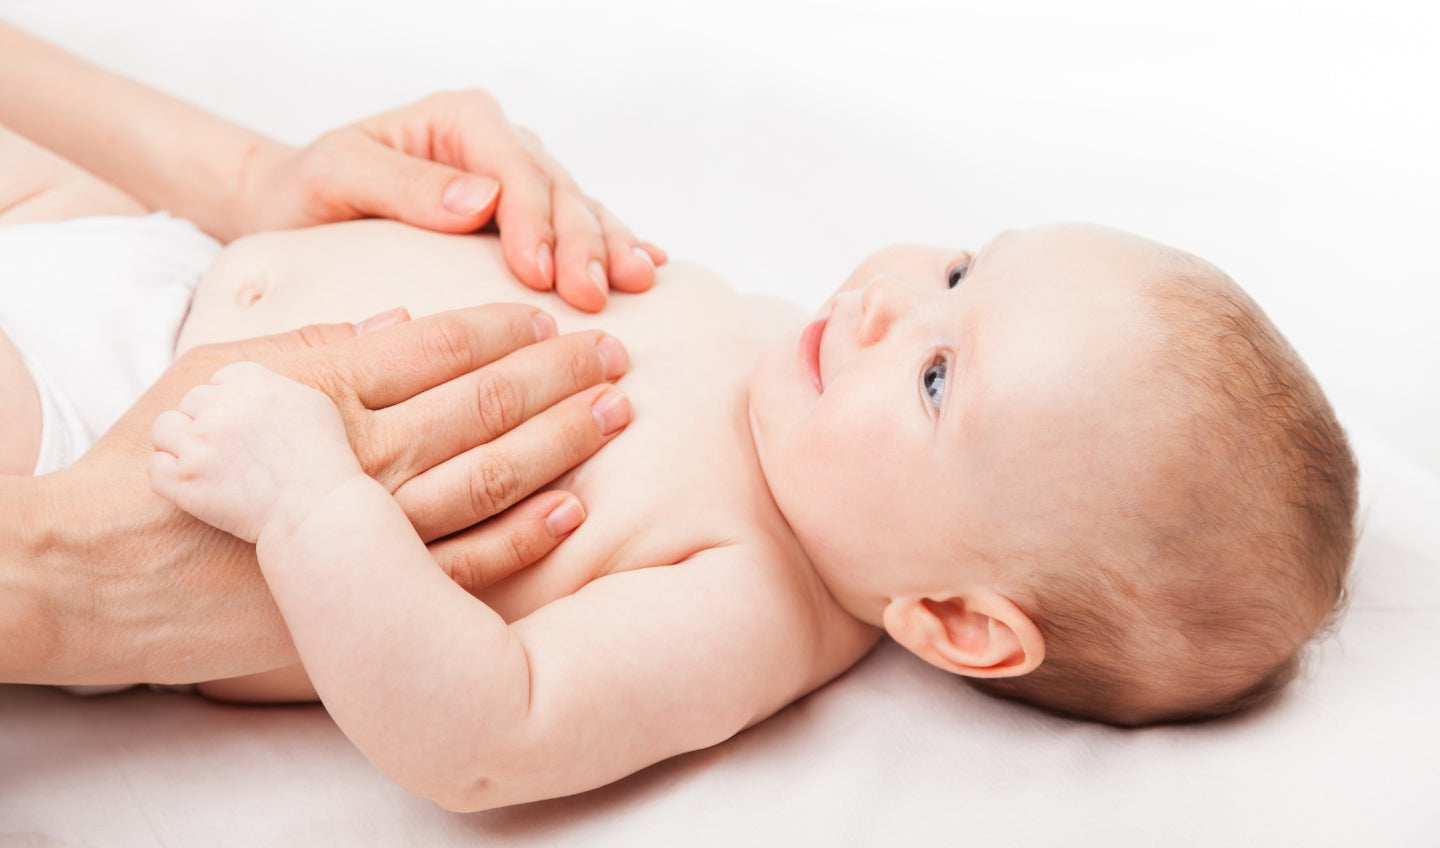 Formula for Sensitive Stomachs: The Best Options for Babies with Digestive Issues